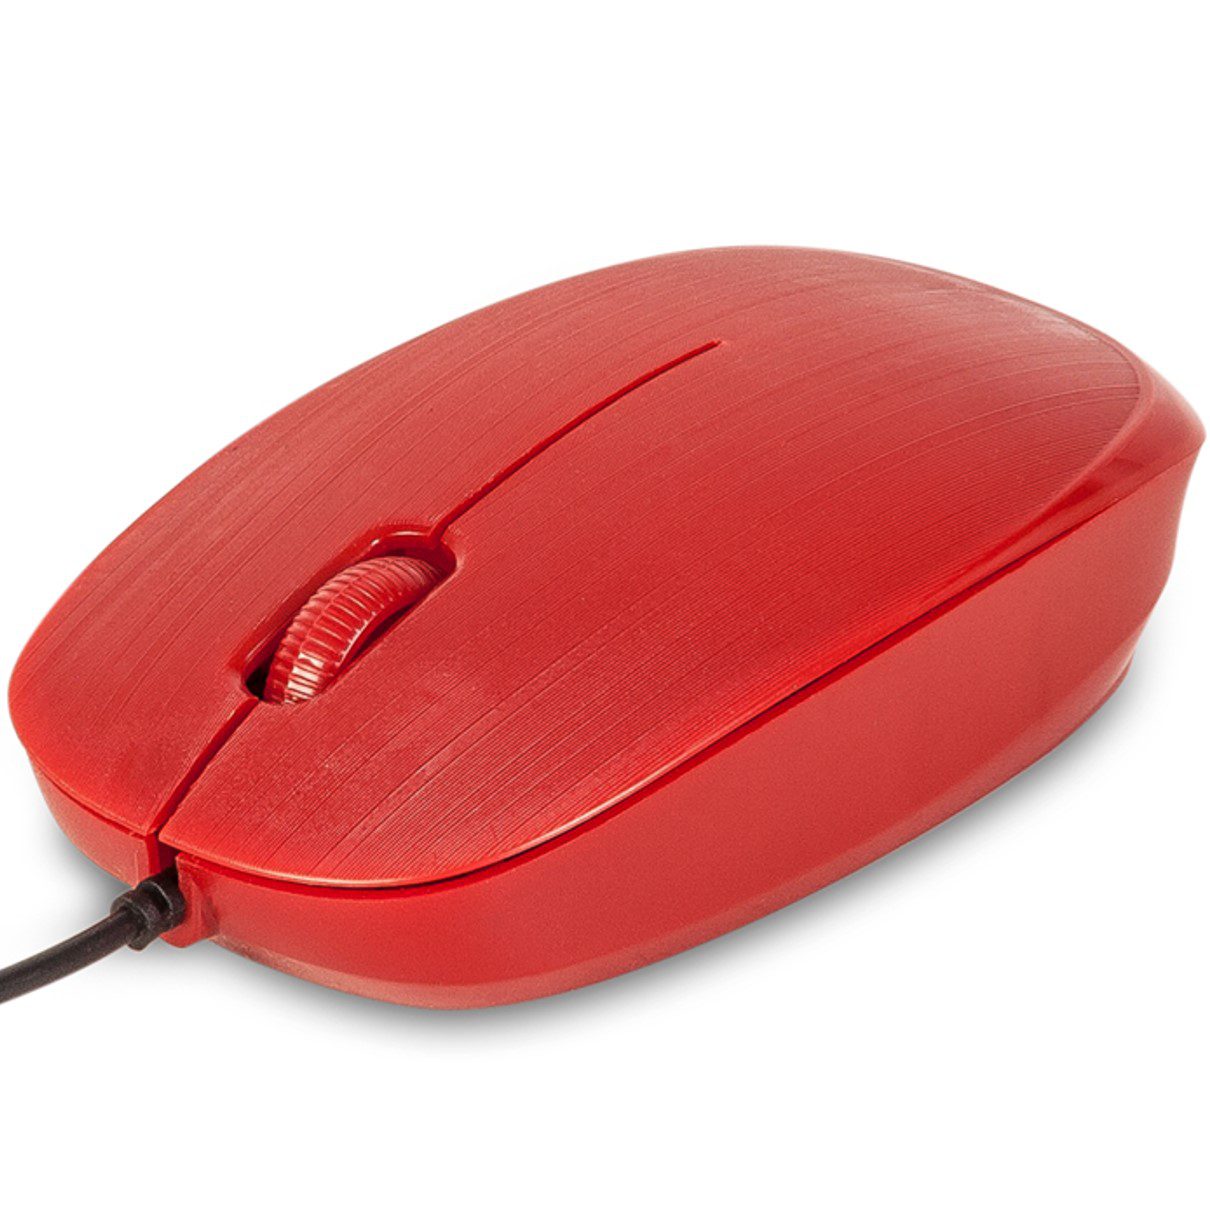 8435430606195-PN-Cod.-Articulo-FLAMERED-Raton-con-cable-ngs-flamered-optico-1000dpi-2-botones-scroll-ergonomico-usb-rojo-1